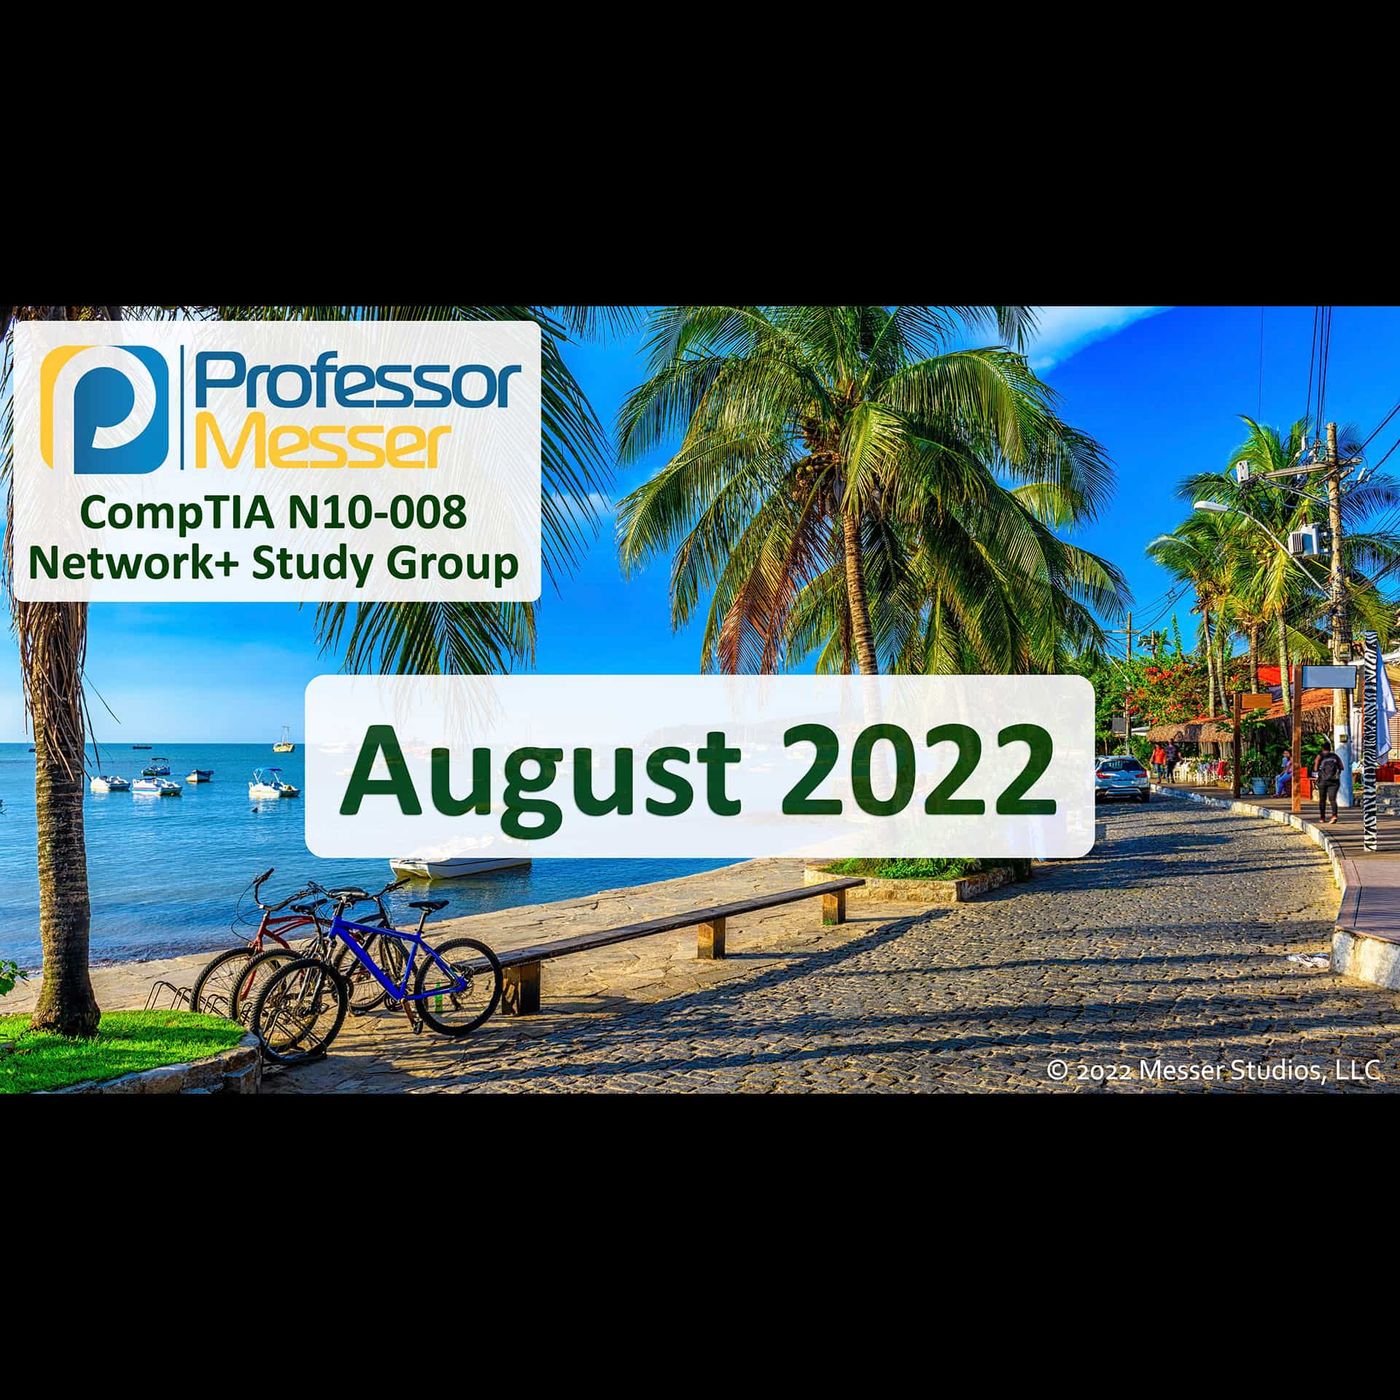 Professor Messer's N10-008 Network+ Study Group After Show - August 2022